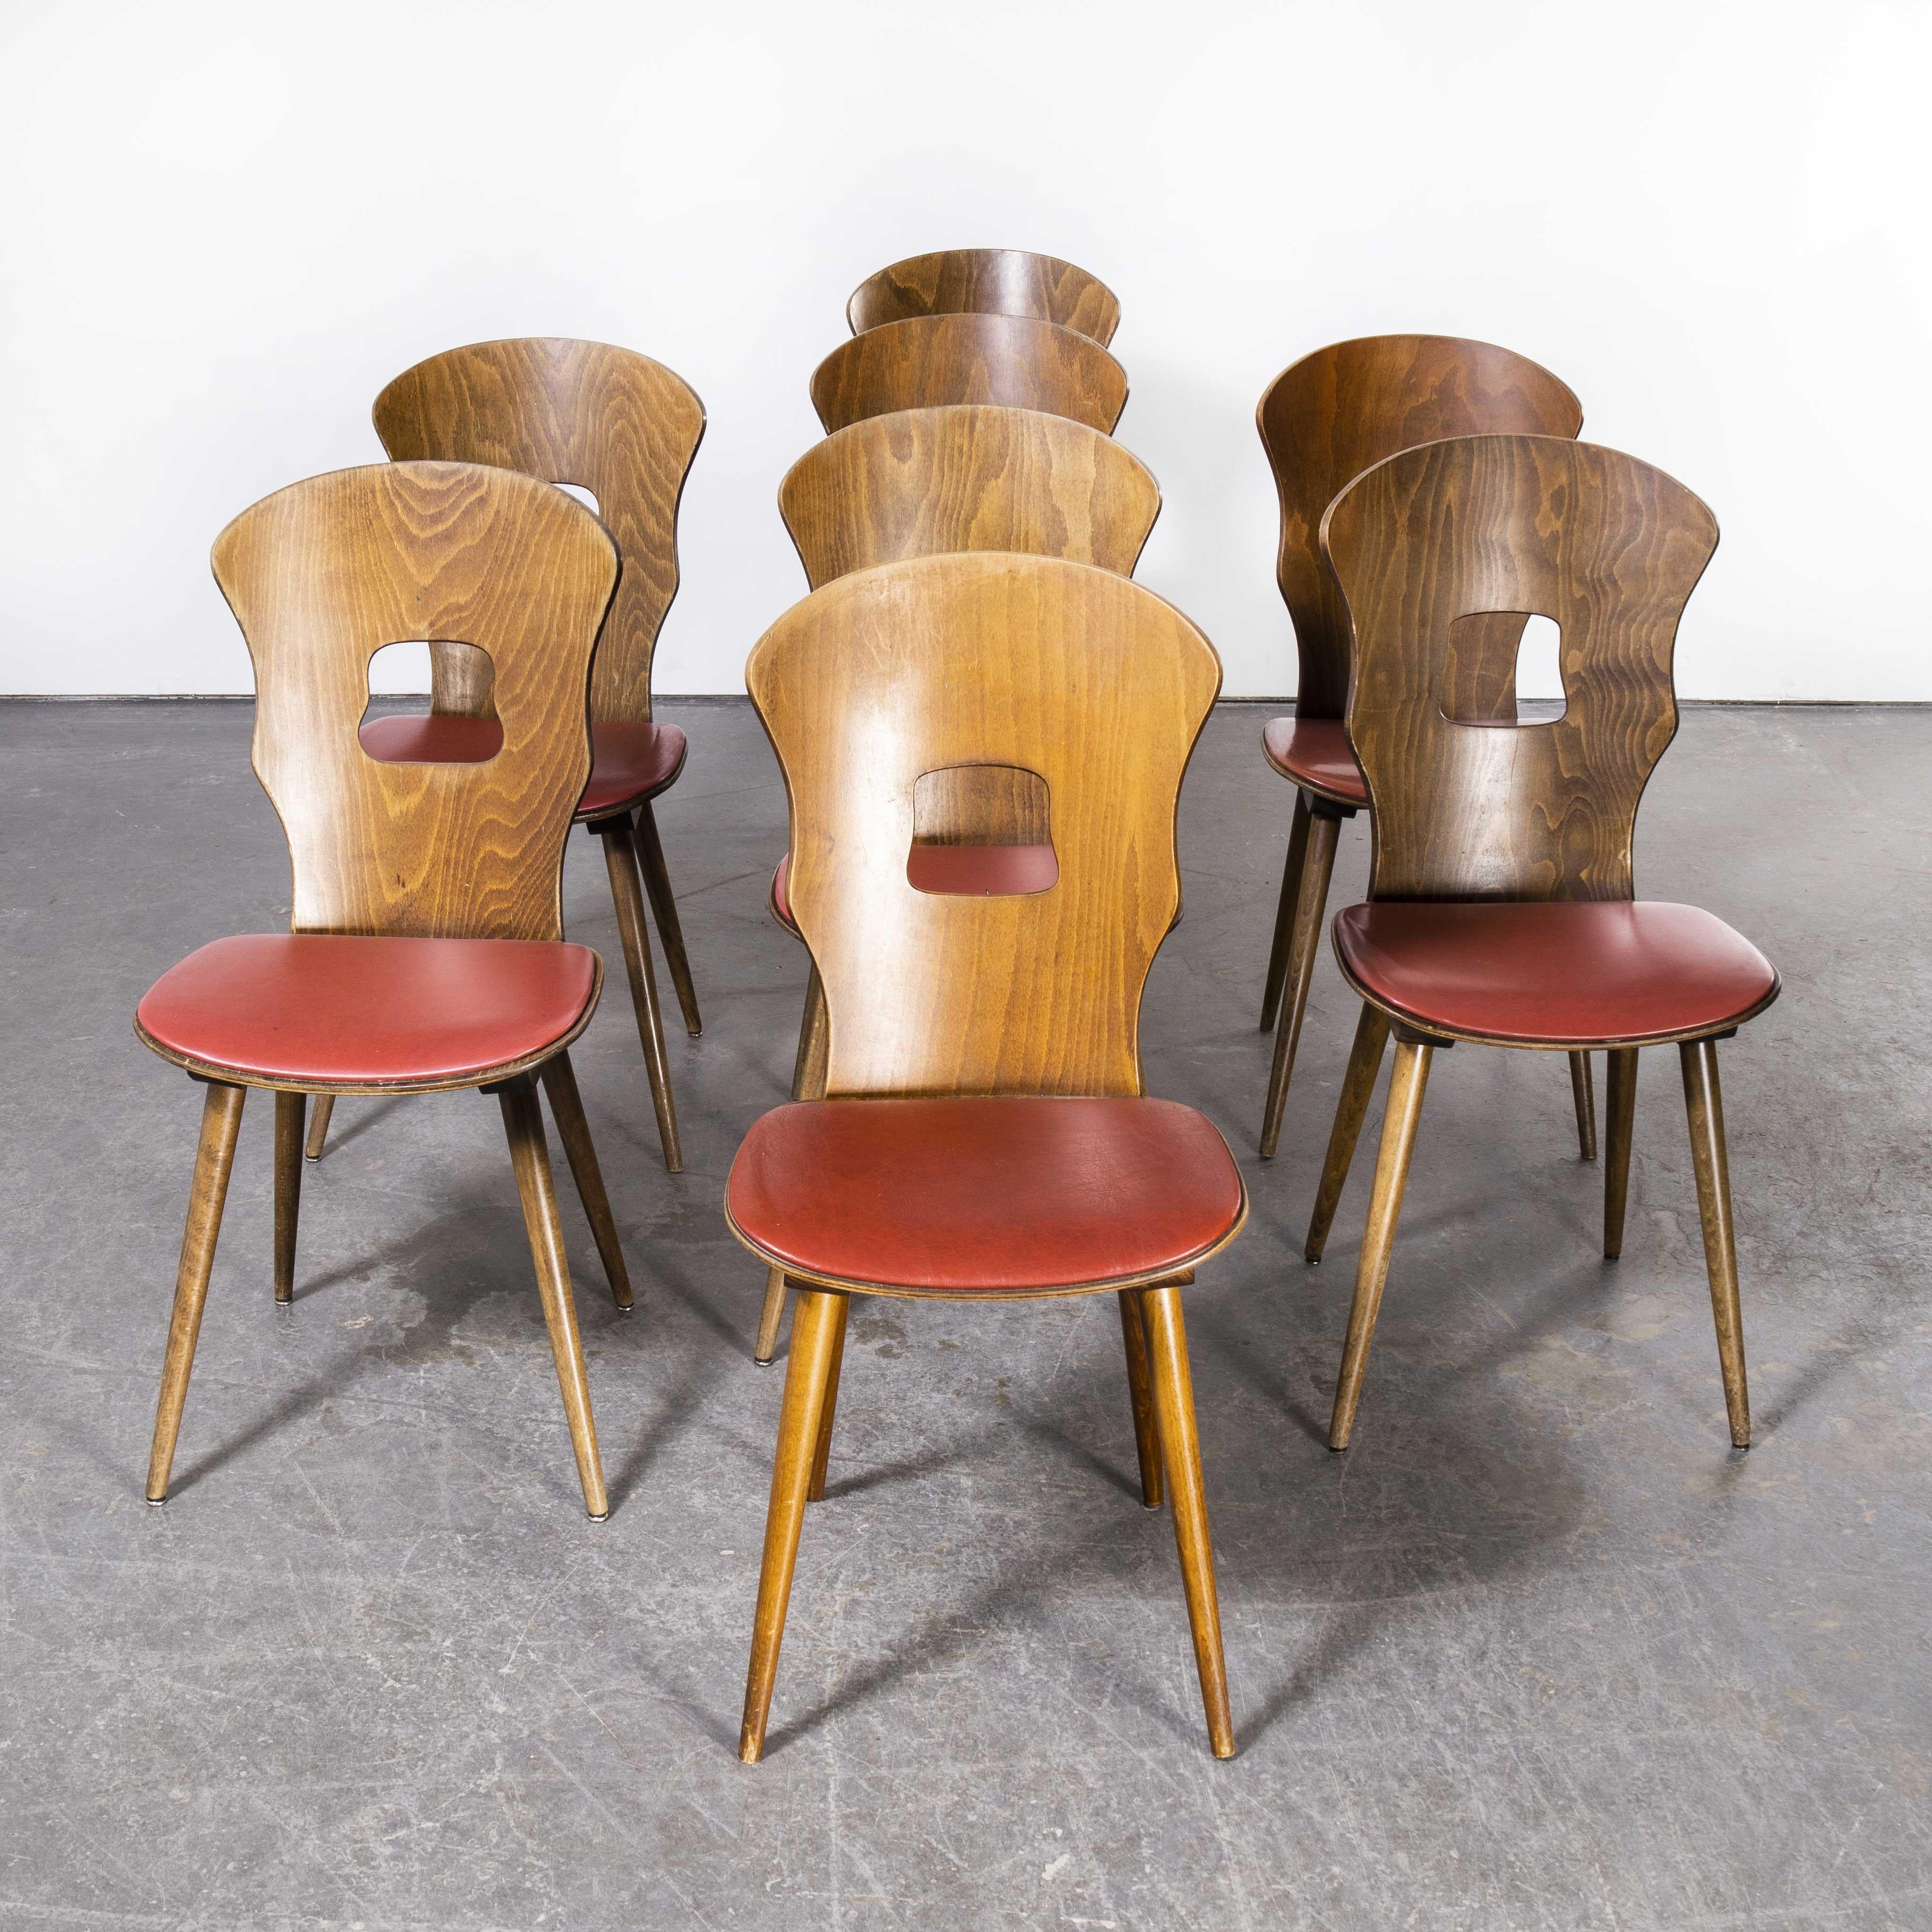 1950’s French Baumann upholstered seat gentiane dining chair – set of eight
1950’s French Baumann upholstered seat gentiane dining chair – set of eight. Classic beech bistro chair made in France by the maker Baumann. Baumann is a slightly off the